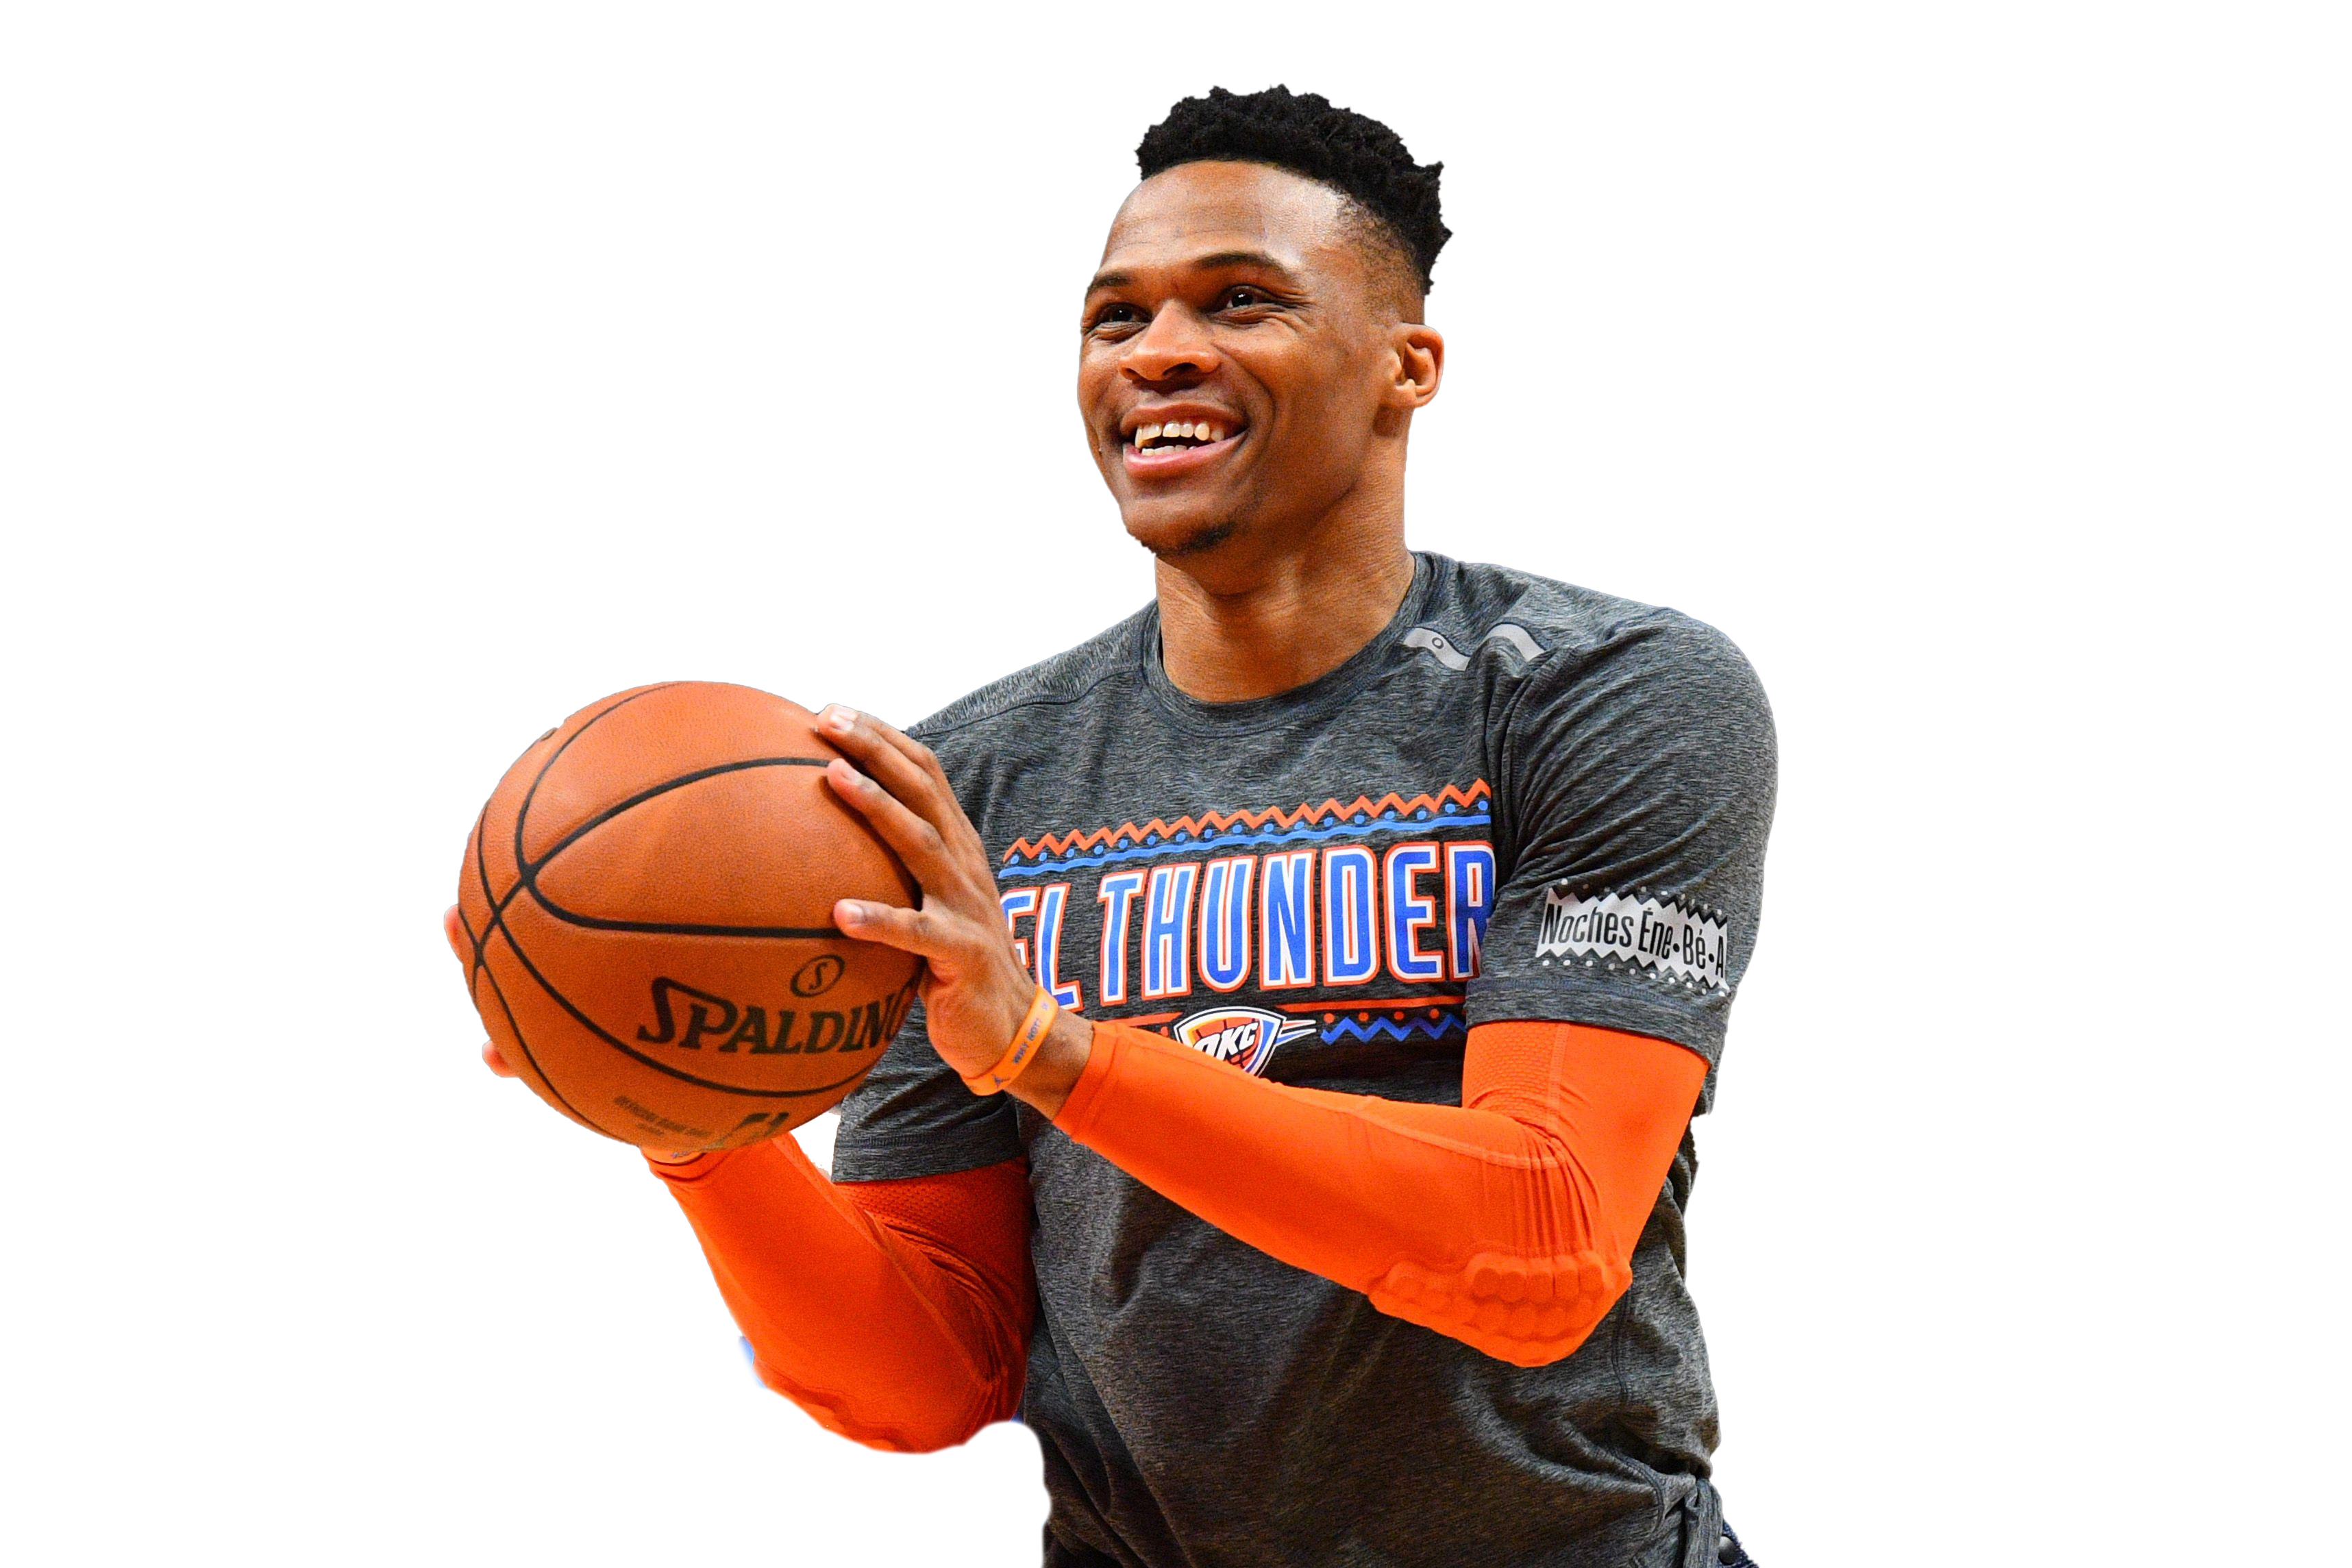 Russell westbrook PNG image image